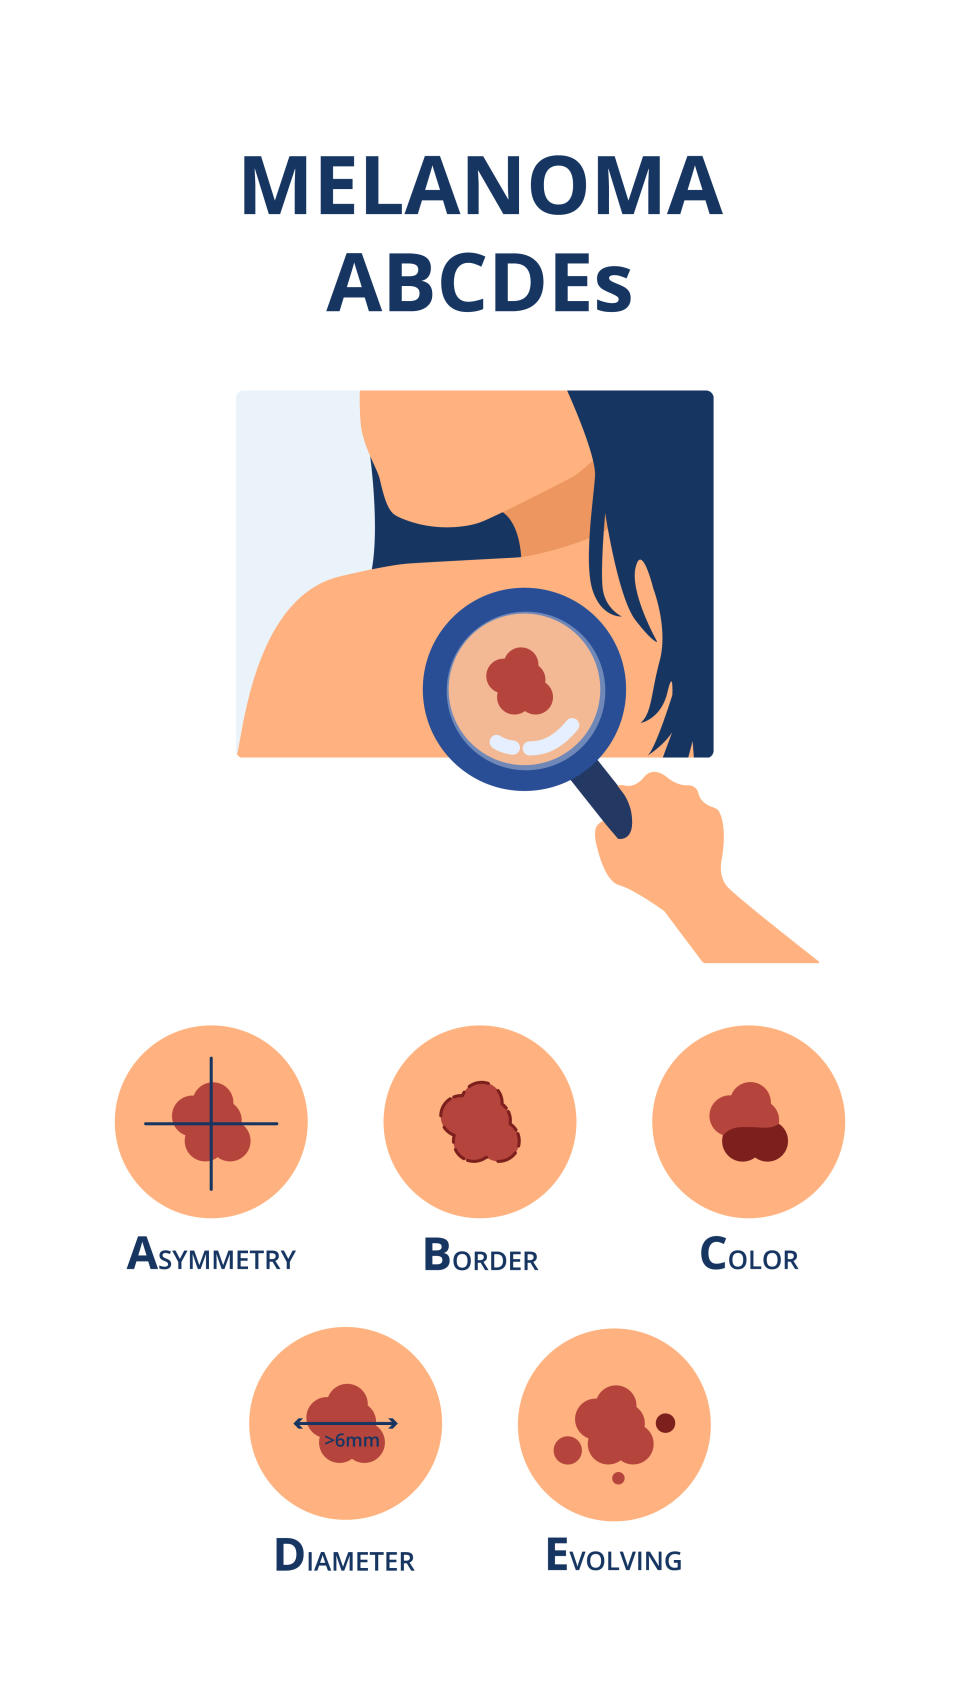 Melanoma ABCDEs symptoms like big diameter, asymmetry, uneven color, uneven border and evolving next to a hand of a doctor detecting a skin cancer spot on a person's back.